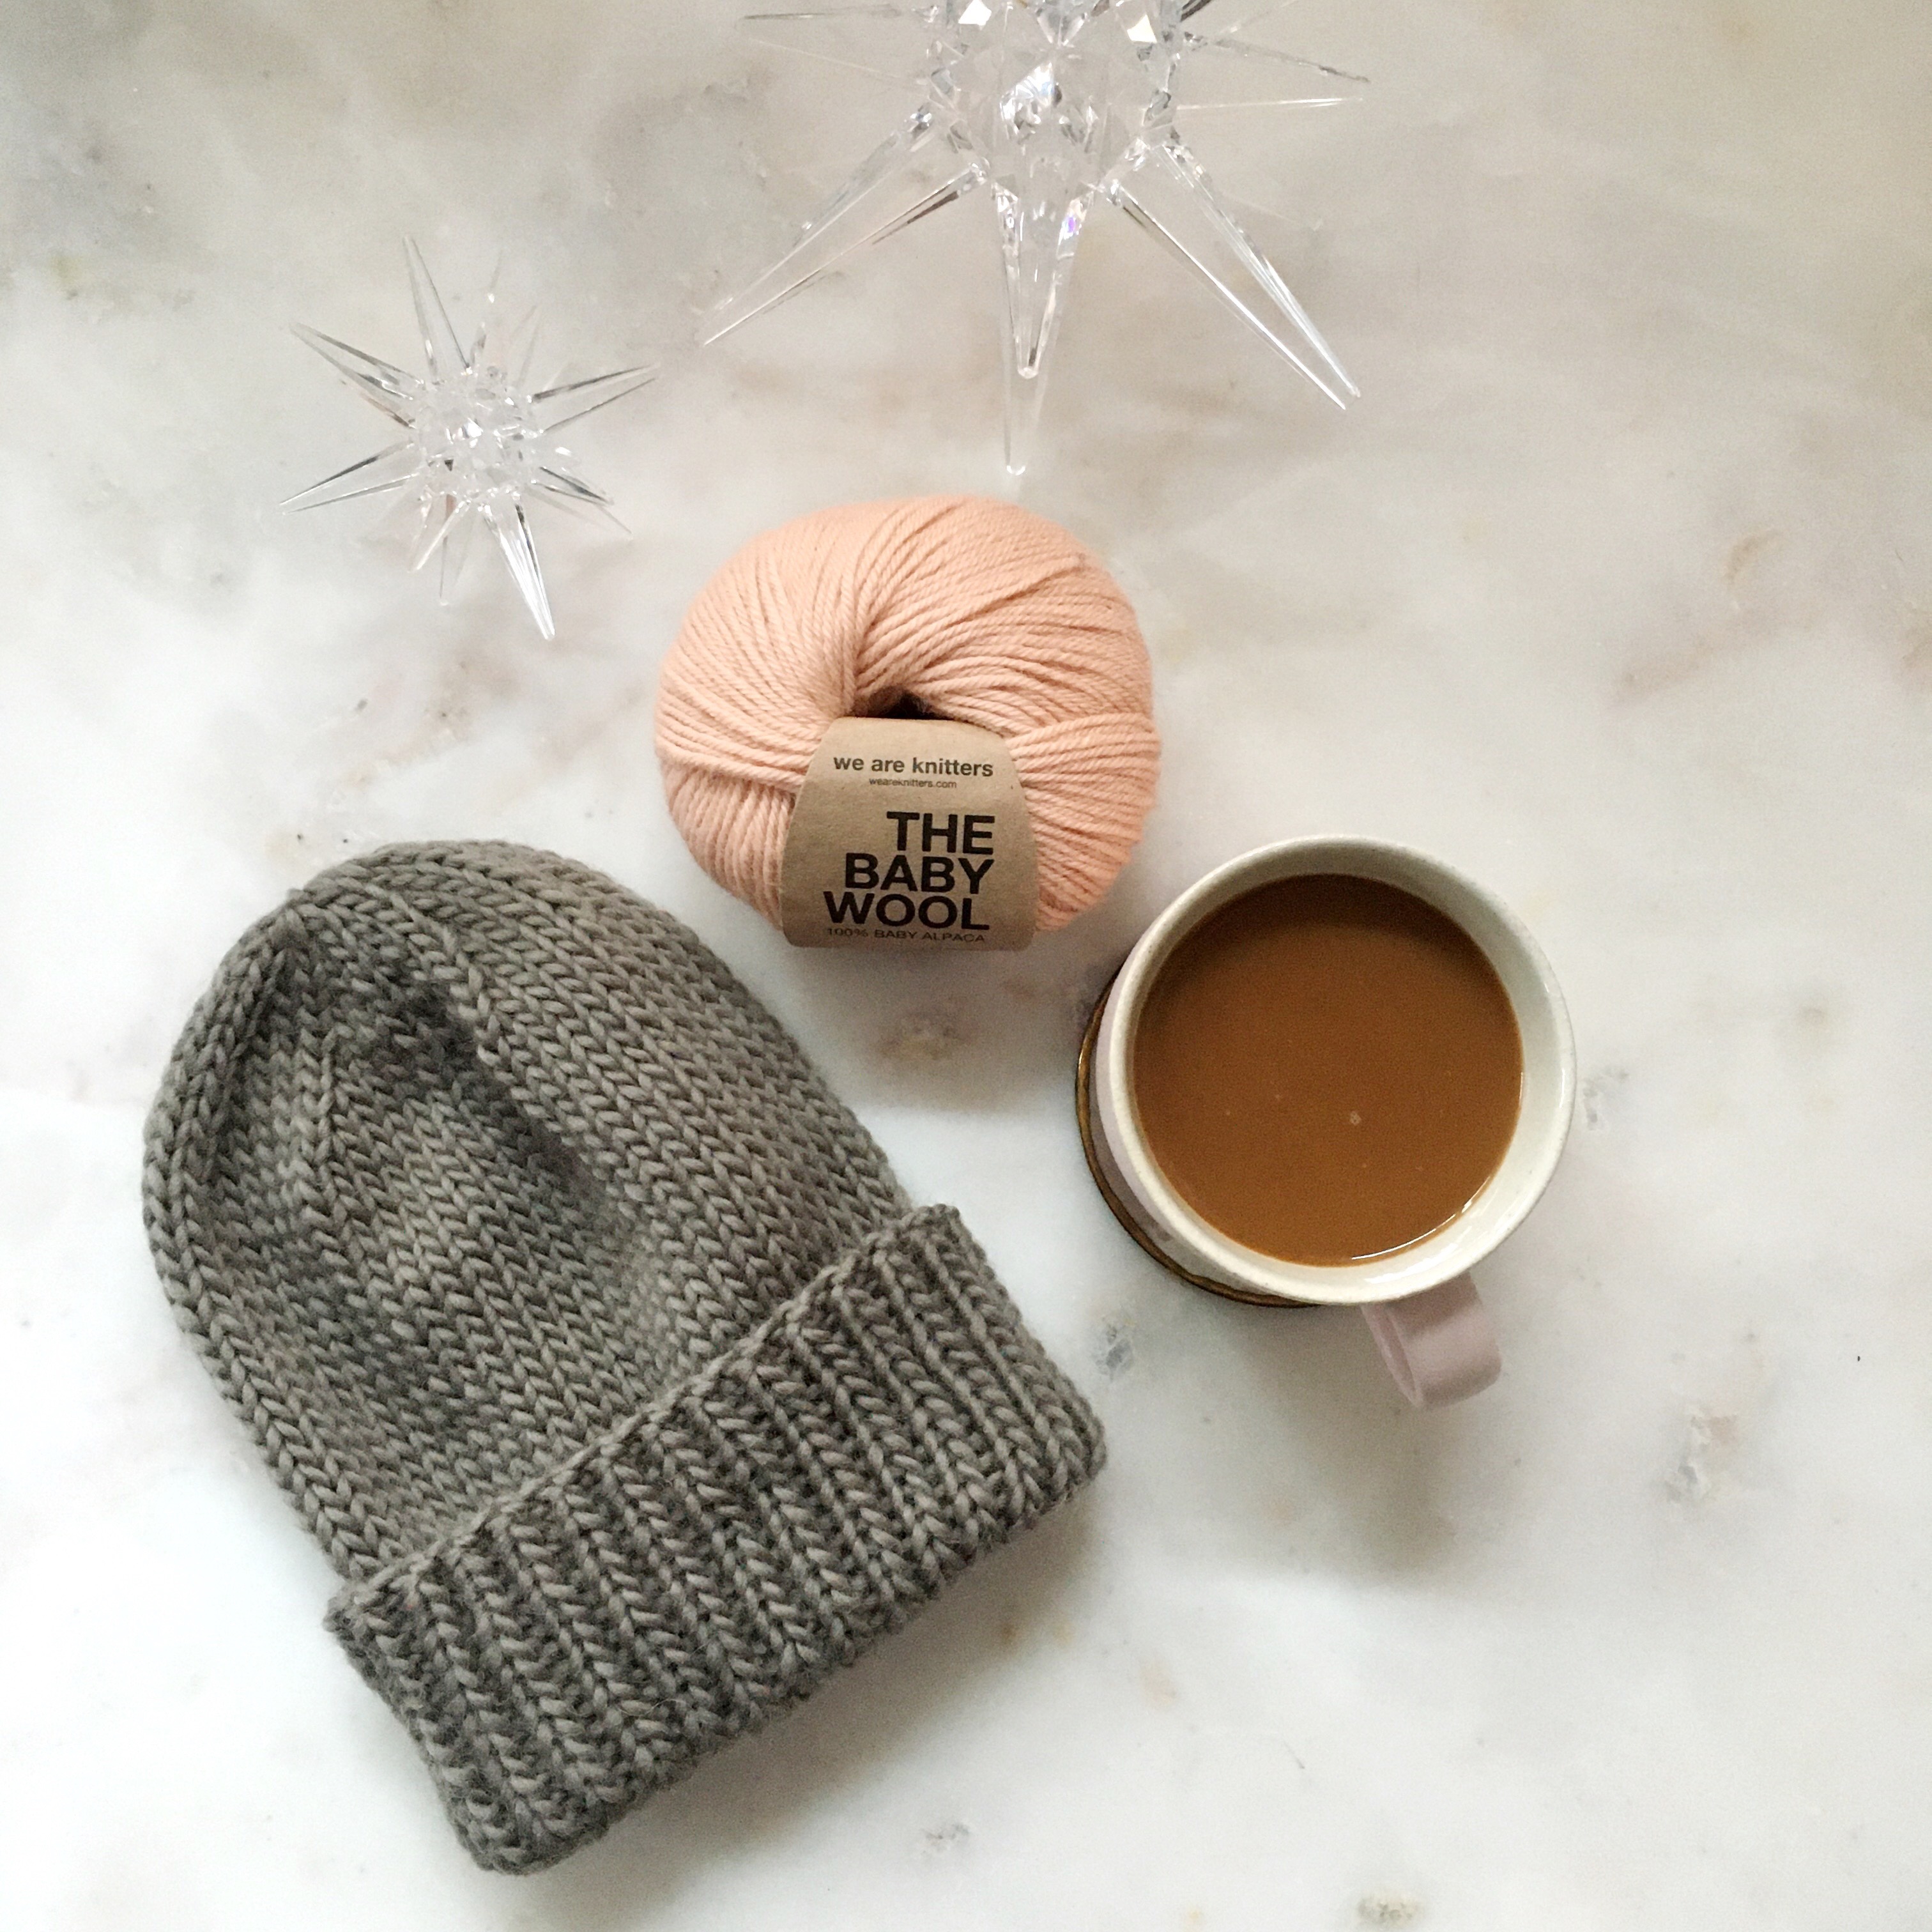 classic cuff beanie (free knitting pattern!) – with love, meredith